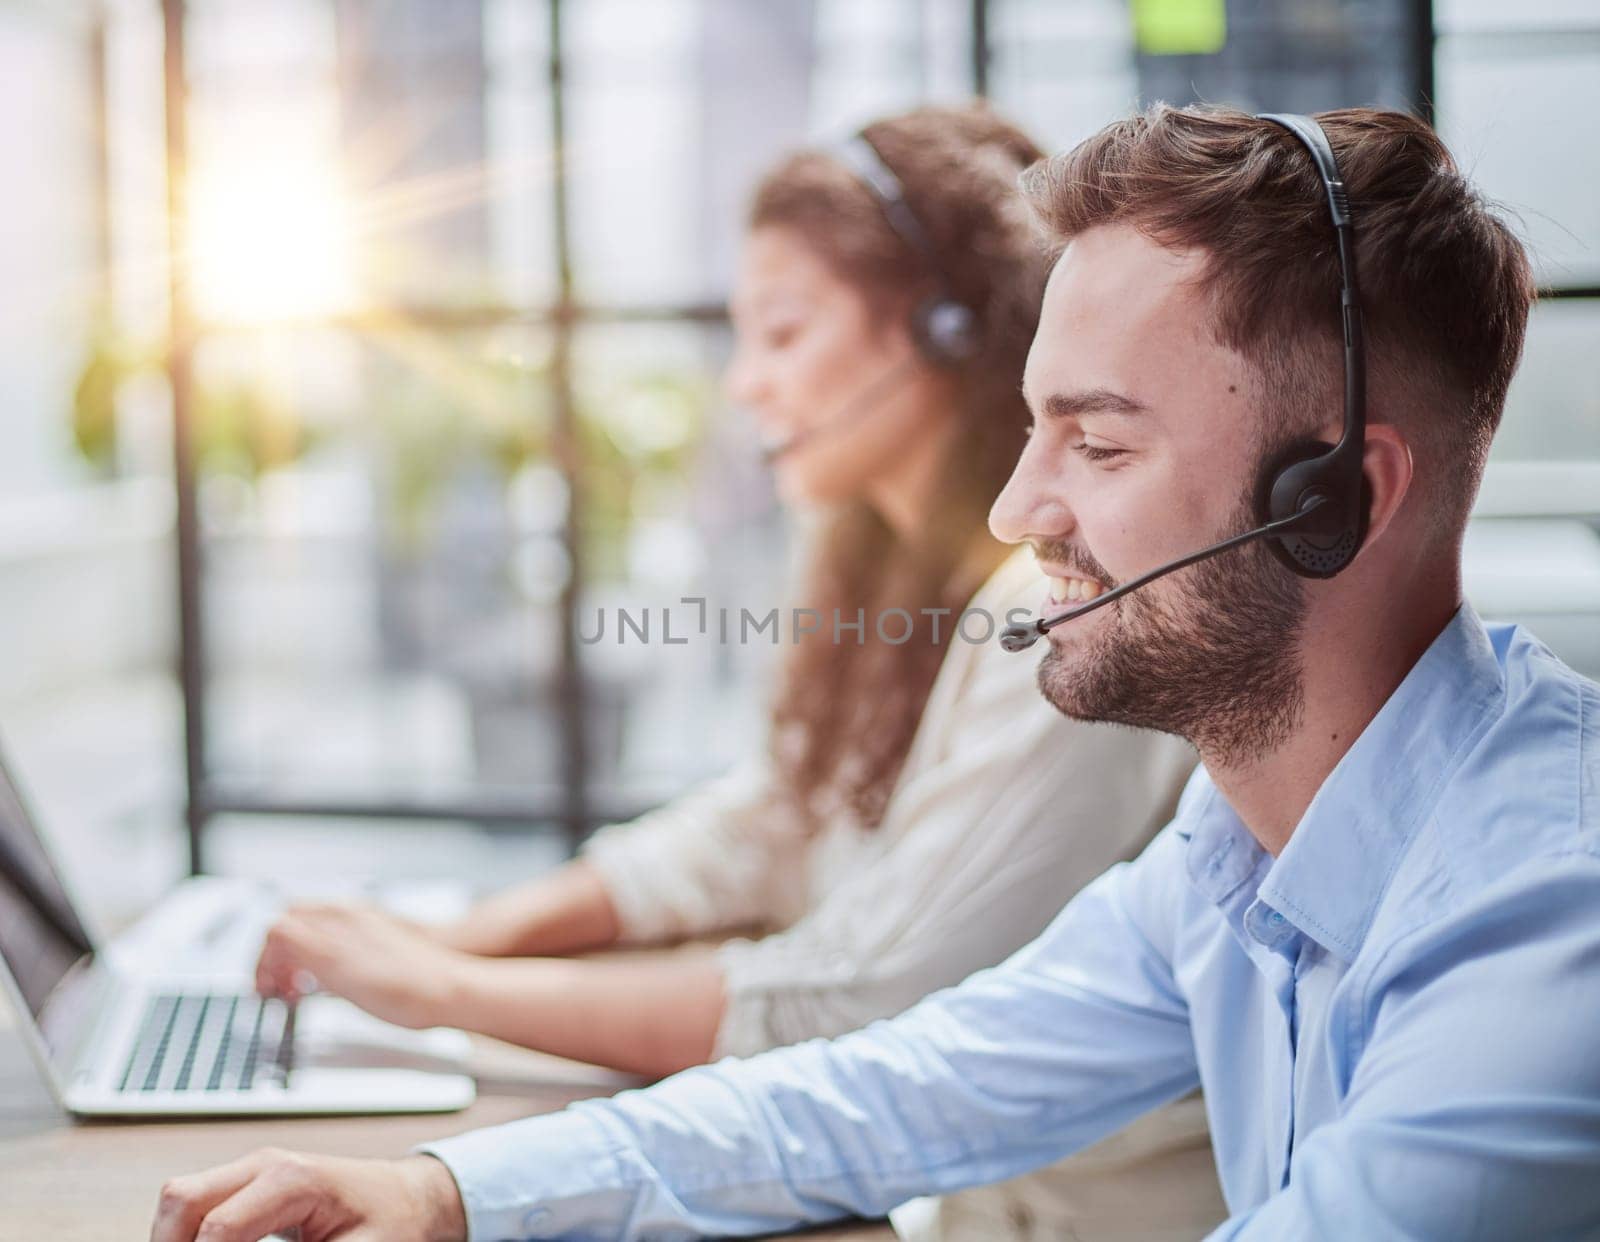 Customer Service Representative With Colleague Working In Office by Prosto